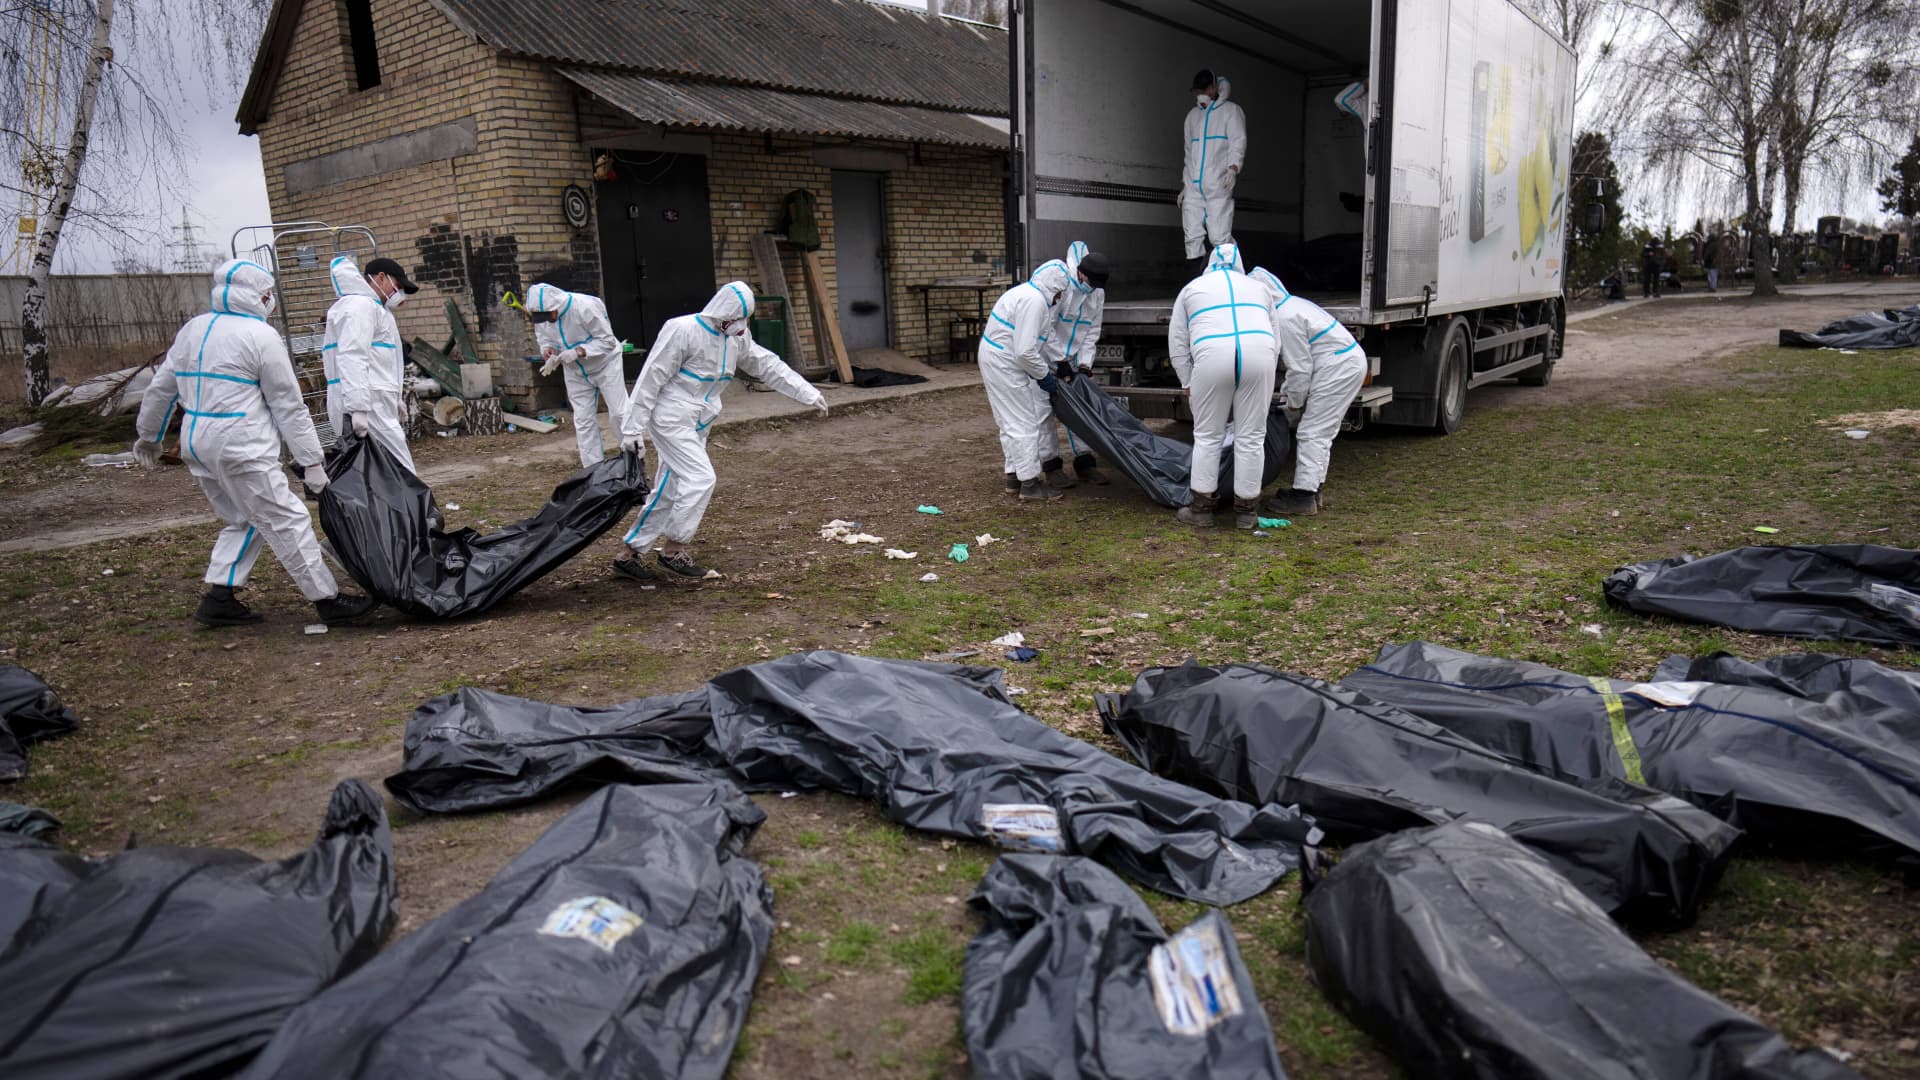 Editor's note: Graphic image. Volunteers load bodies of civilians killed in Bucha onto a truck to be taken to a morgue for investigation, in the outskirts of Kyiv, Ukraine, Tuesday, April 12, 2022.